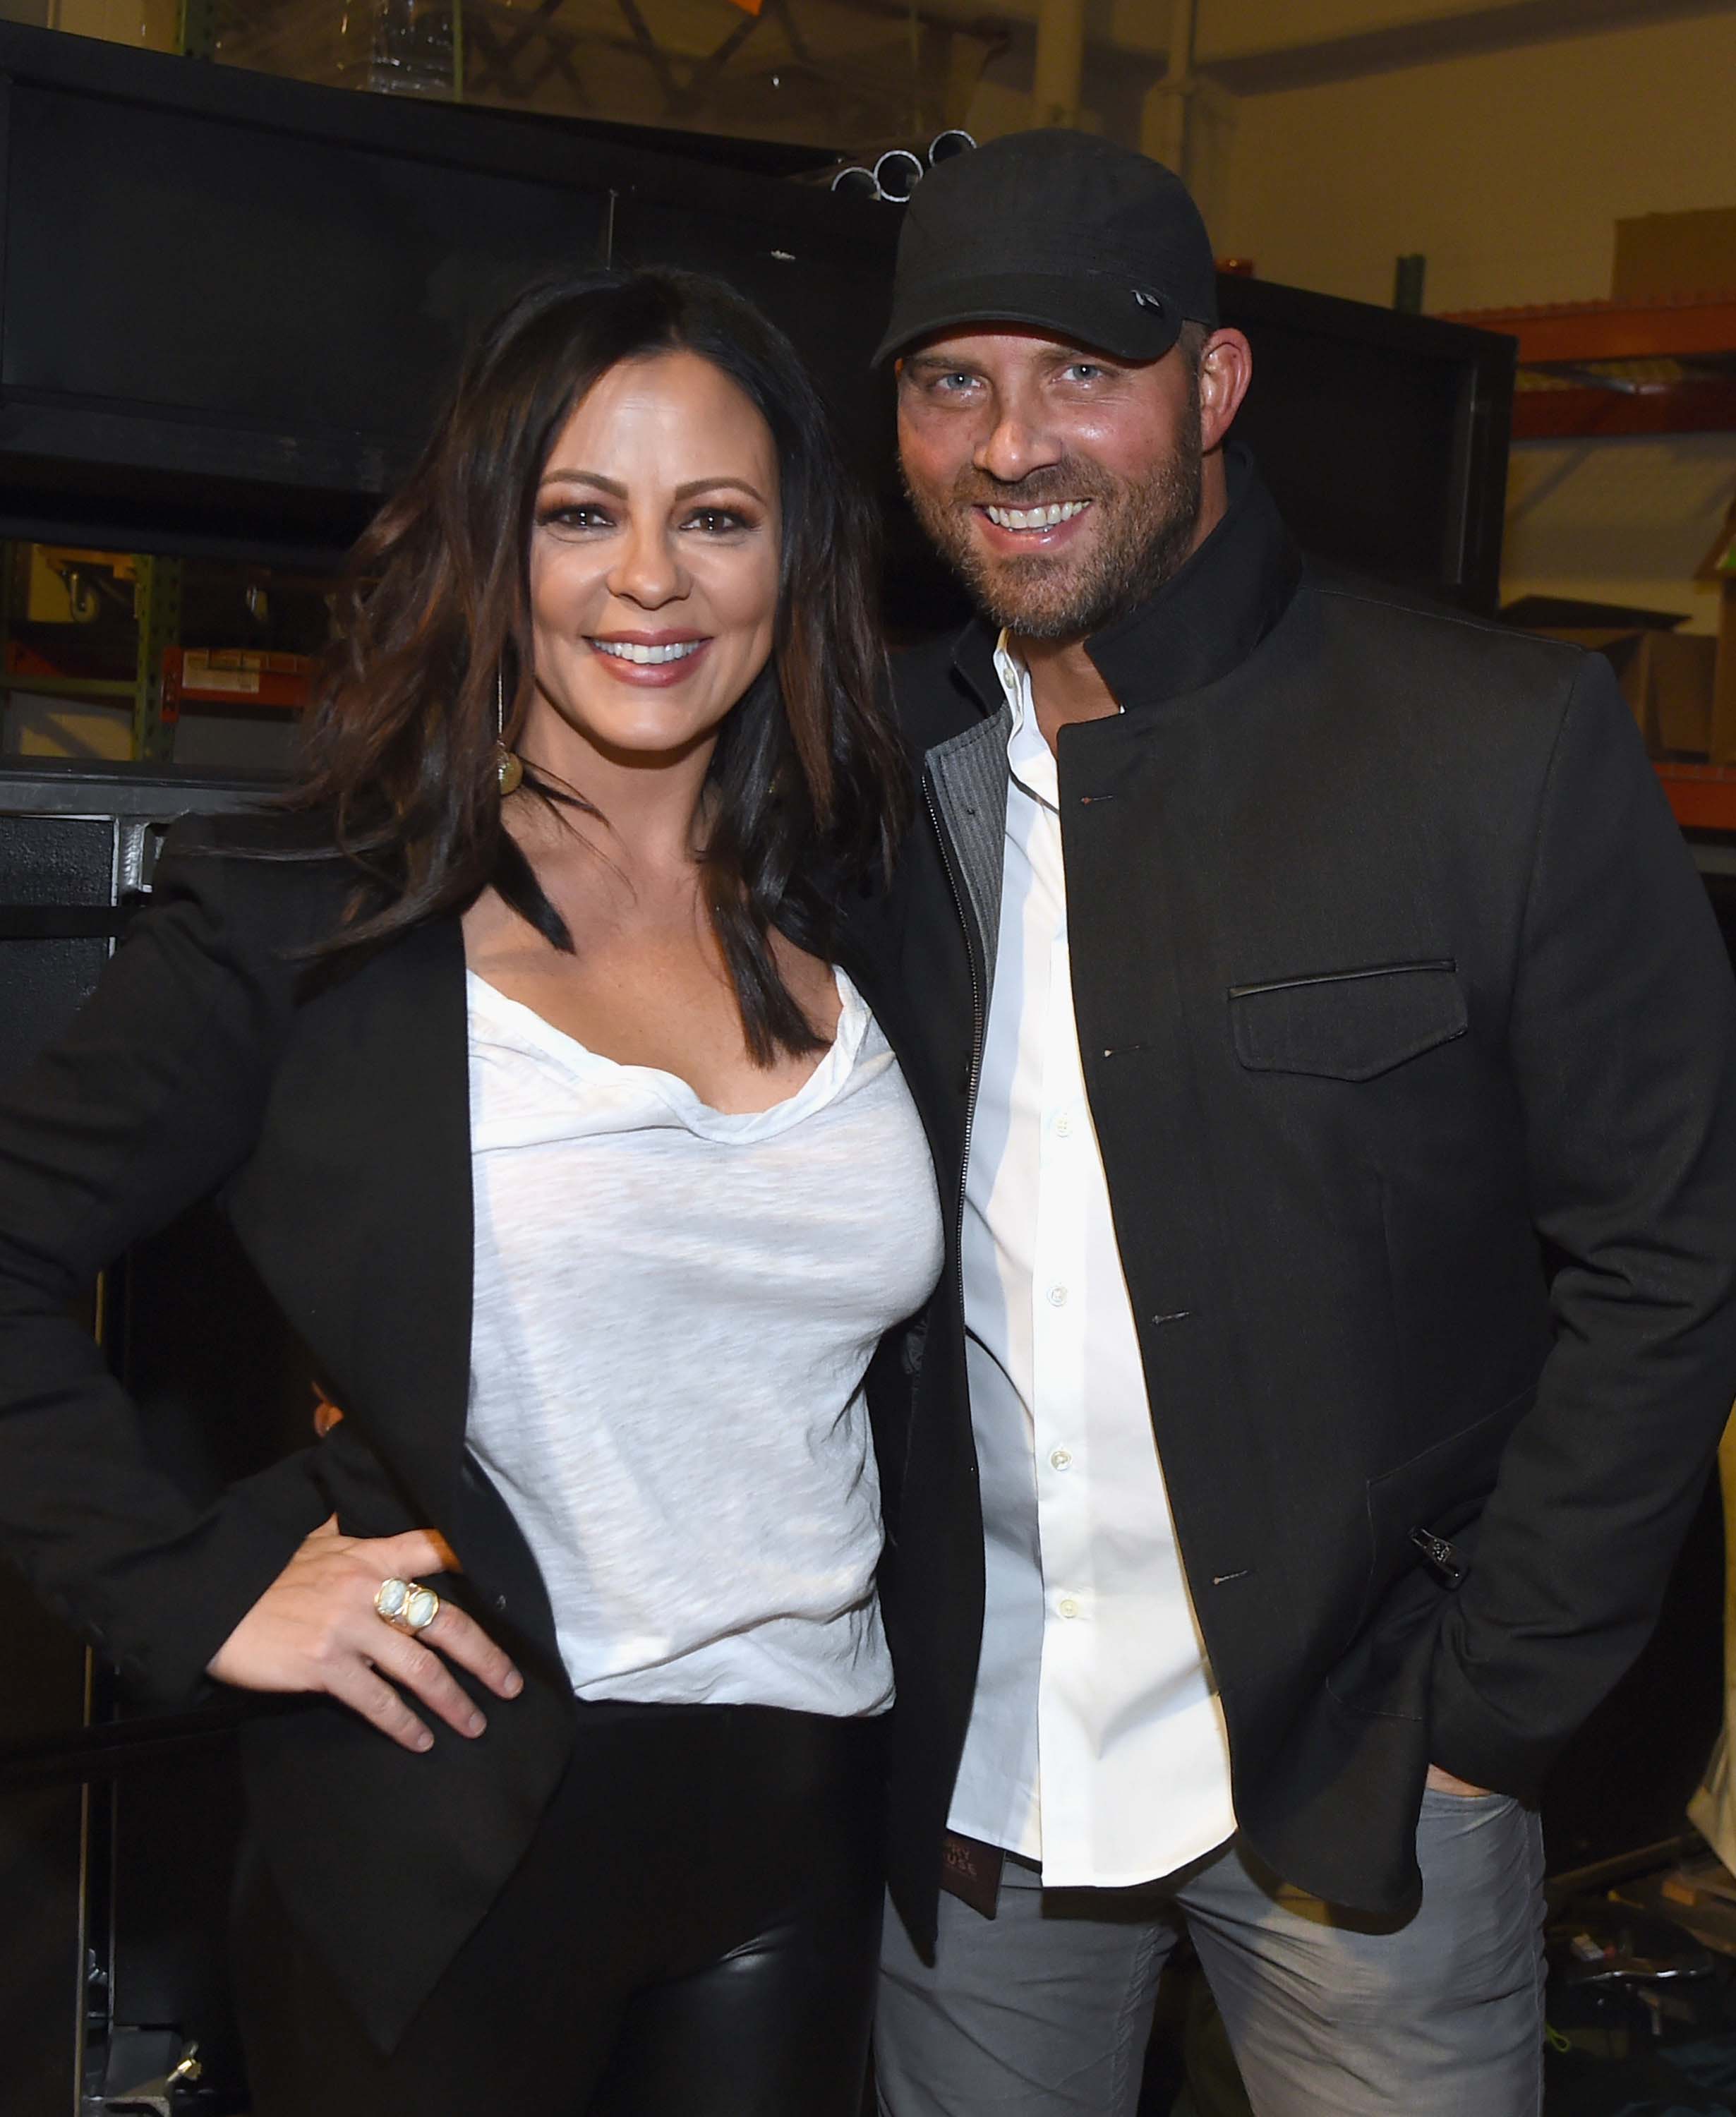 Sara Evans attends the Eagles in concert